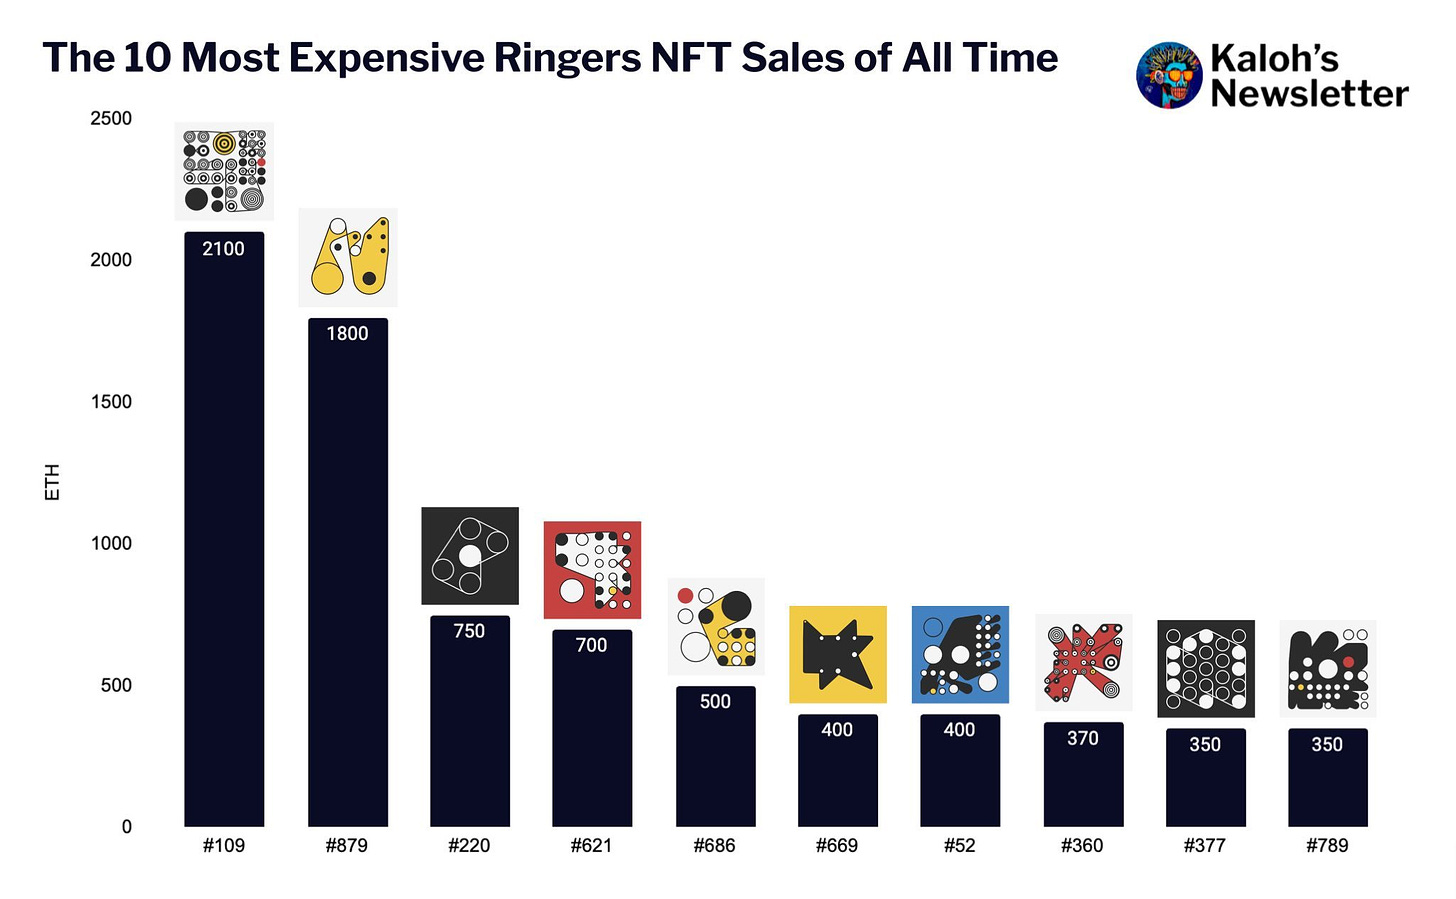 The 10 Most Expensive Ringers NFT Sales of All Time.